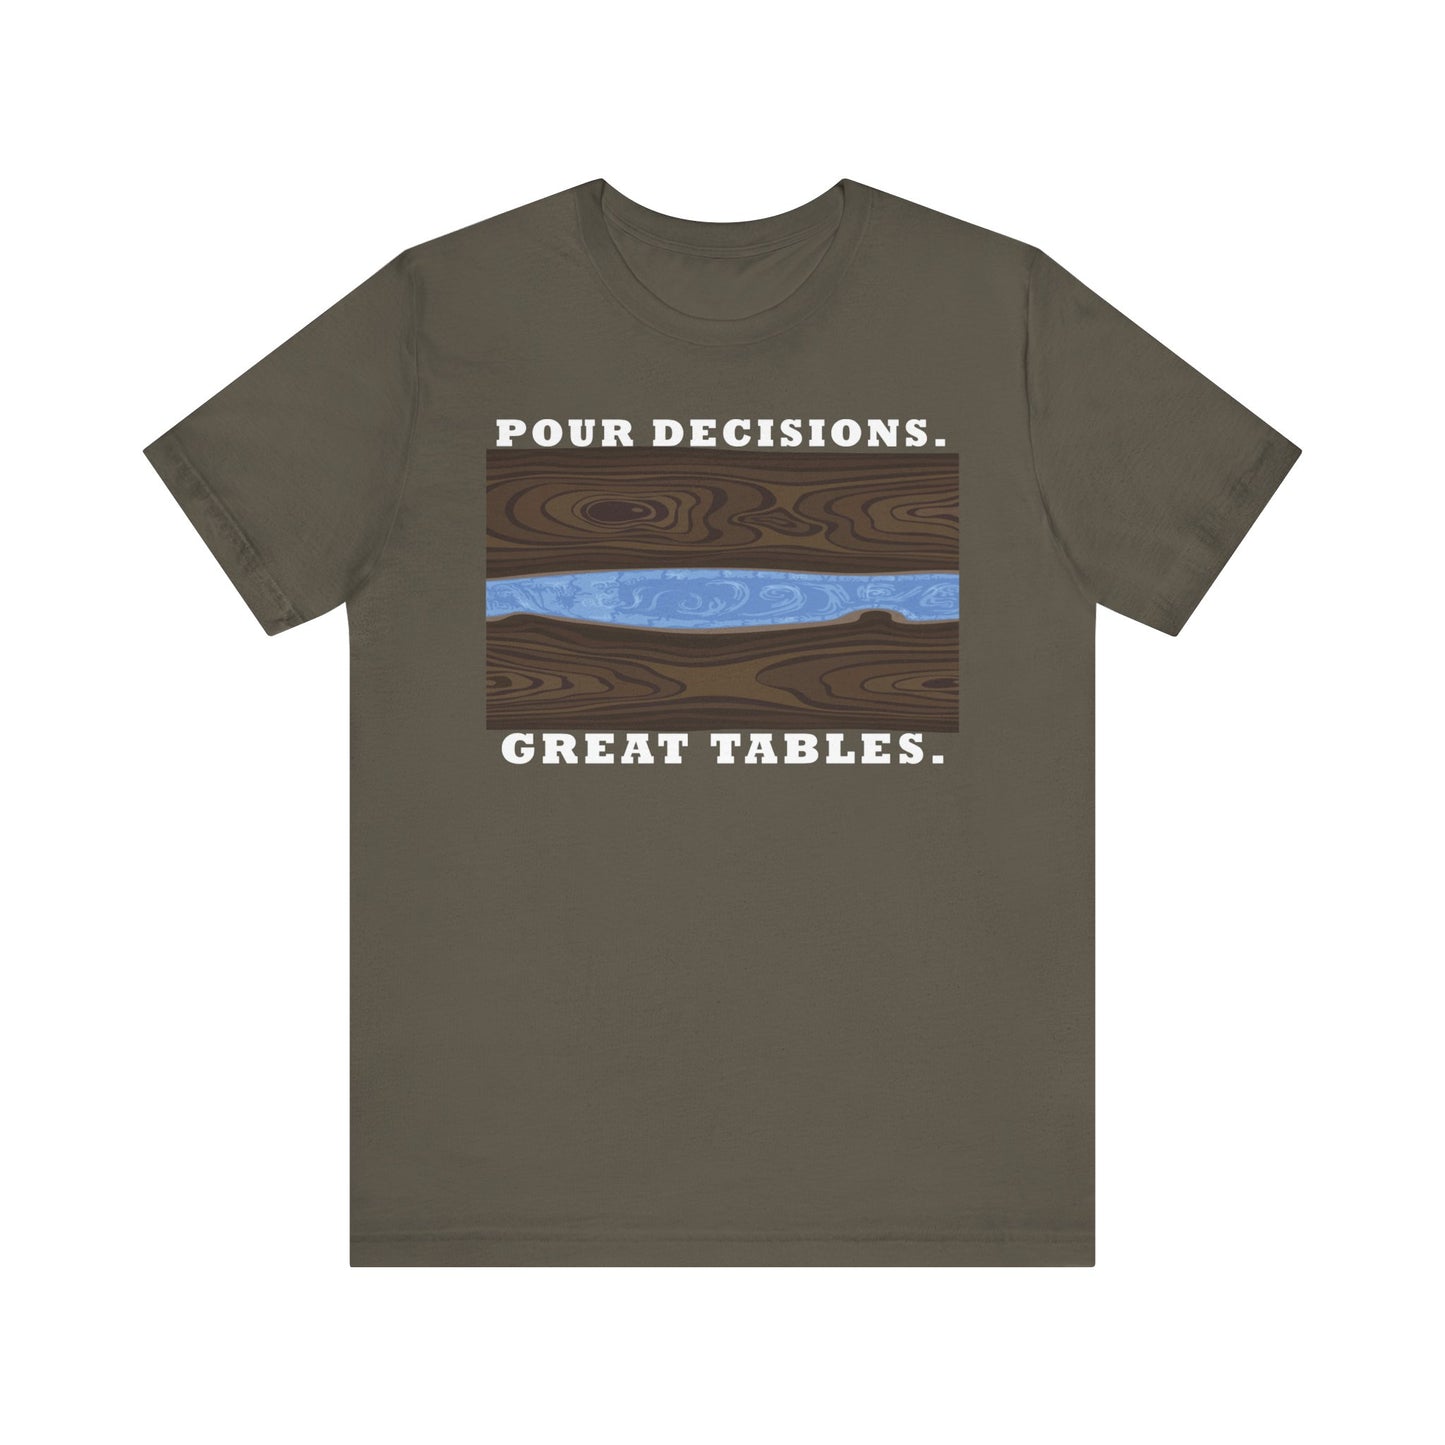 Pour Decisions. Great Tables. Unisex Jersey Short Sleeve Tee